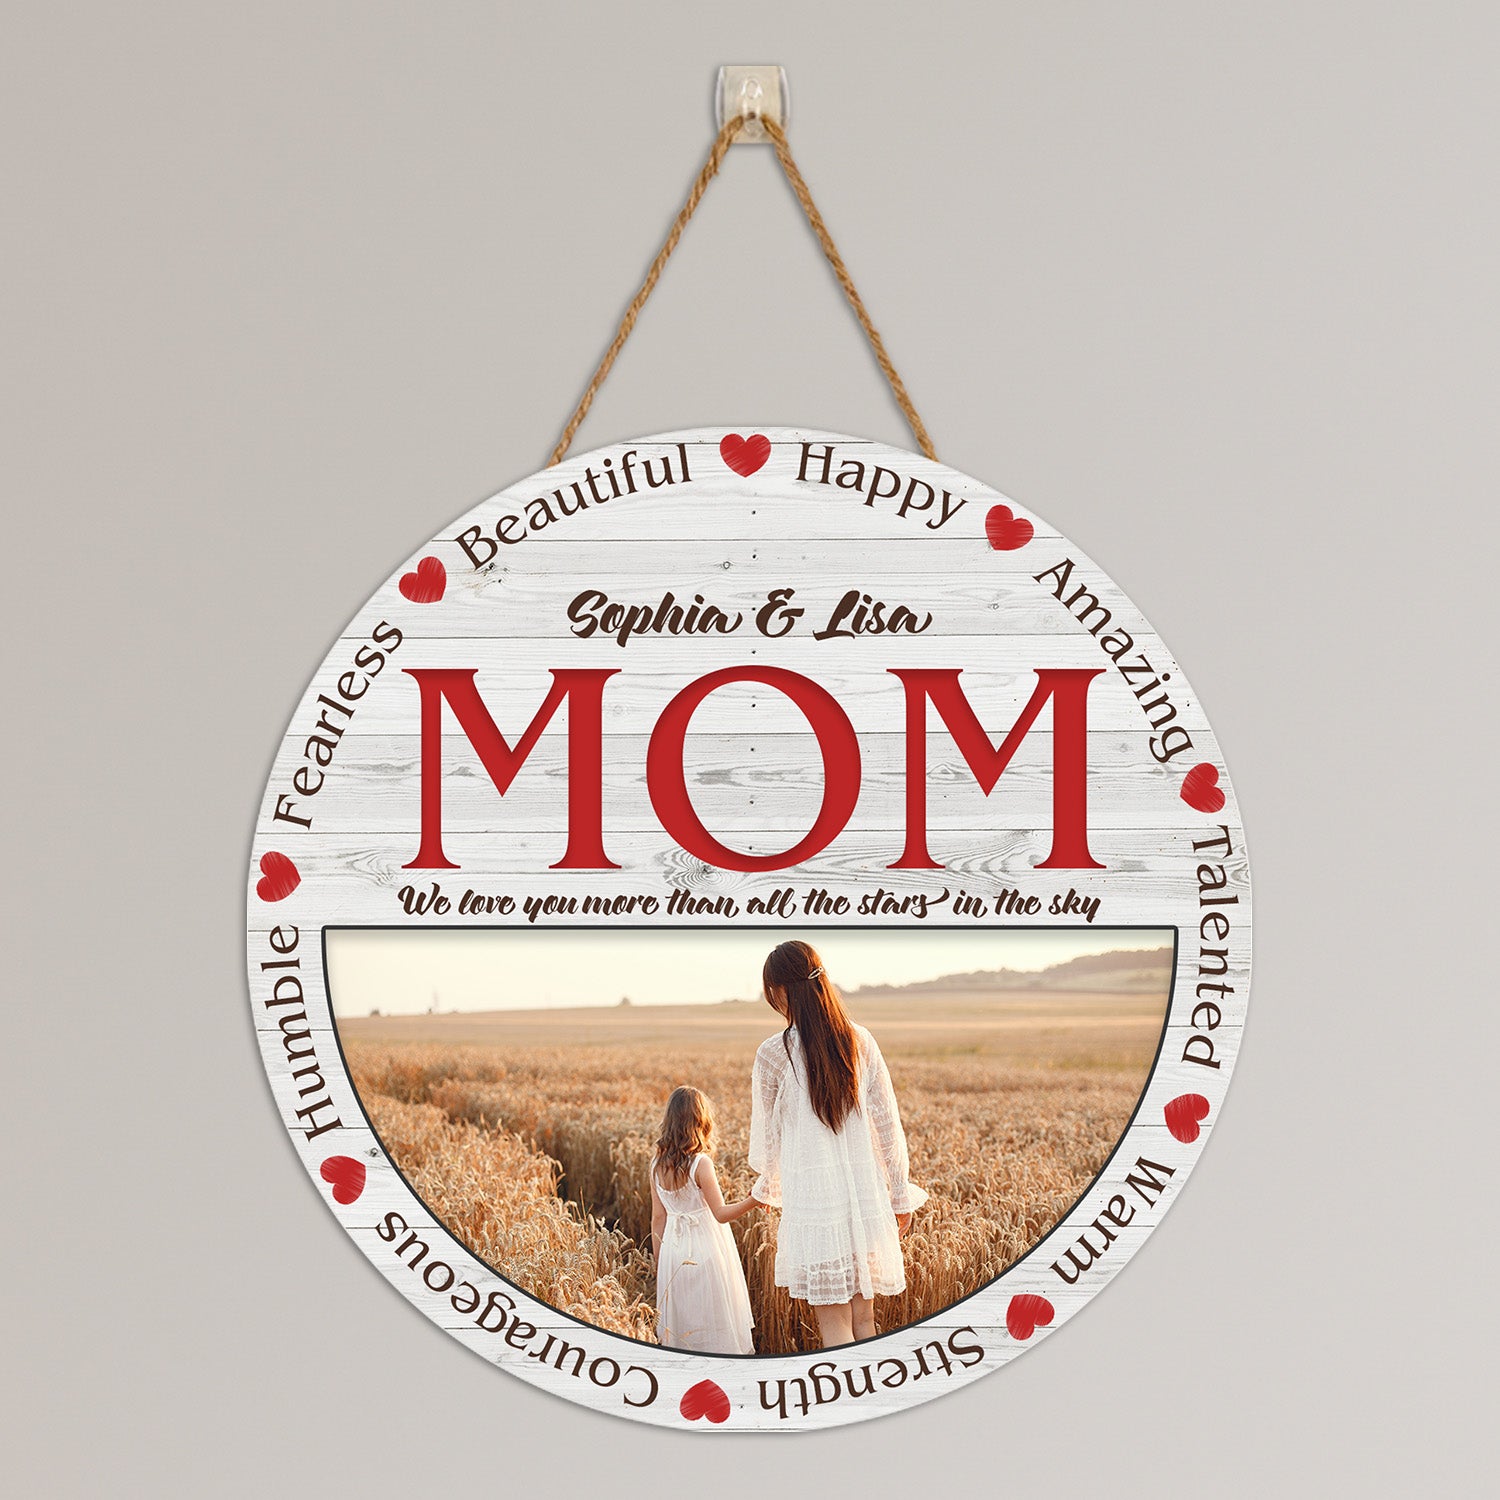 Mom, Fearless, Beautiful, Happy, Amazing, Talented, Warm, Strength, Courageous, Humble, Custom Photo, Personalized Name, Round Wood Sign